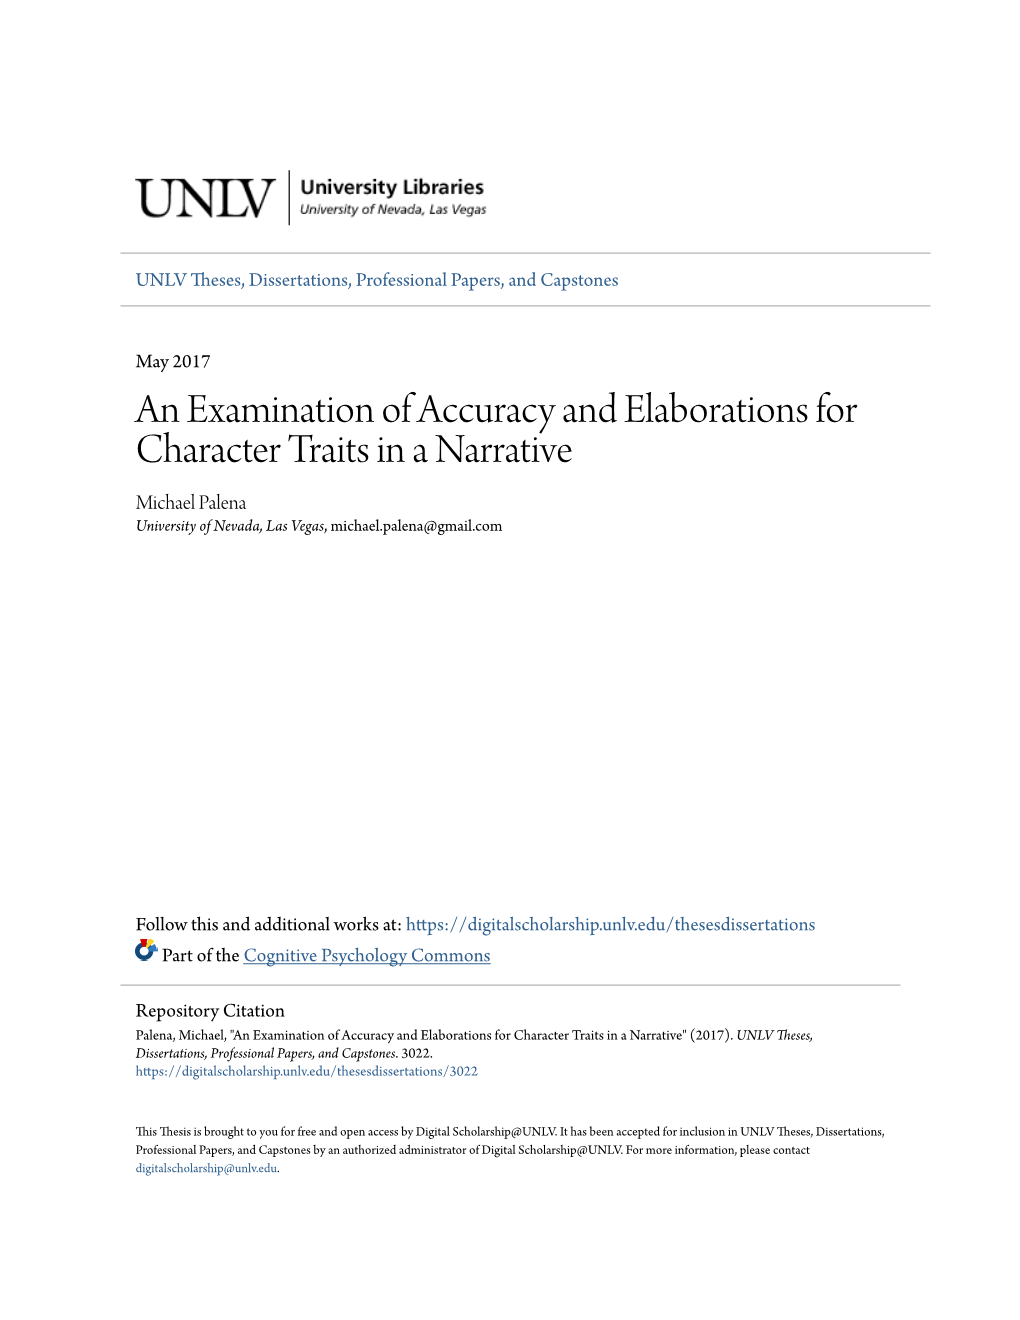 An Examination of Accuracy and Elaborations for Character Traits in a Narrative Michael Palena University of Nevada, Las Vegas, Michael.Palena@Gmail.Com